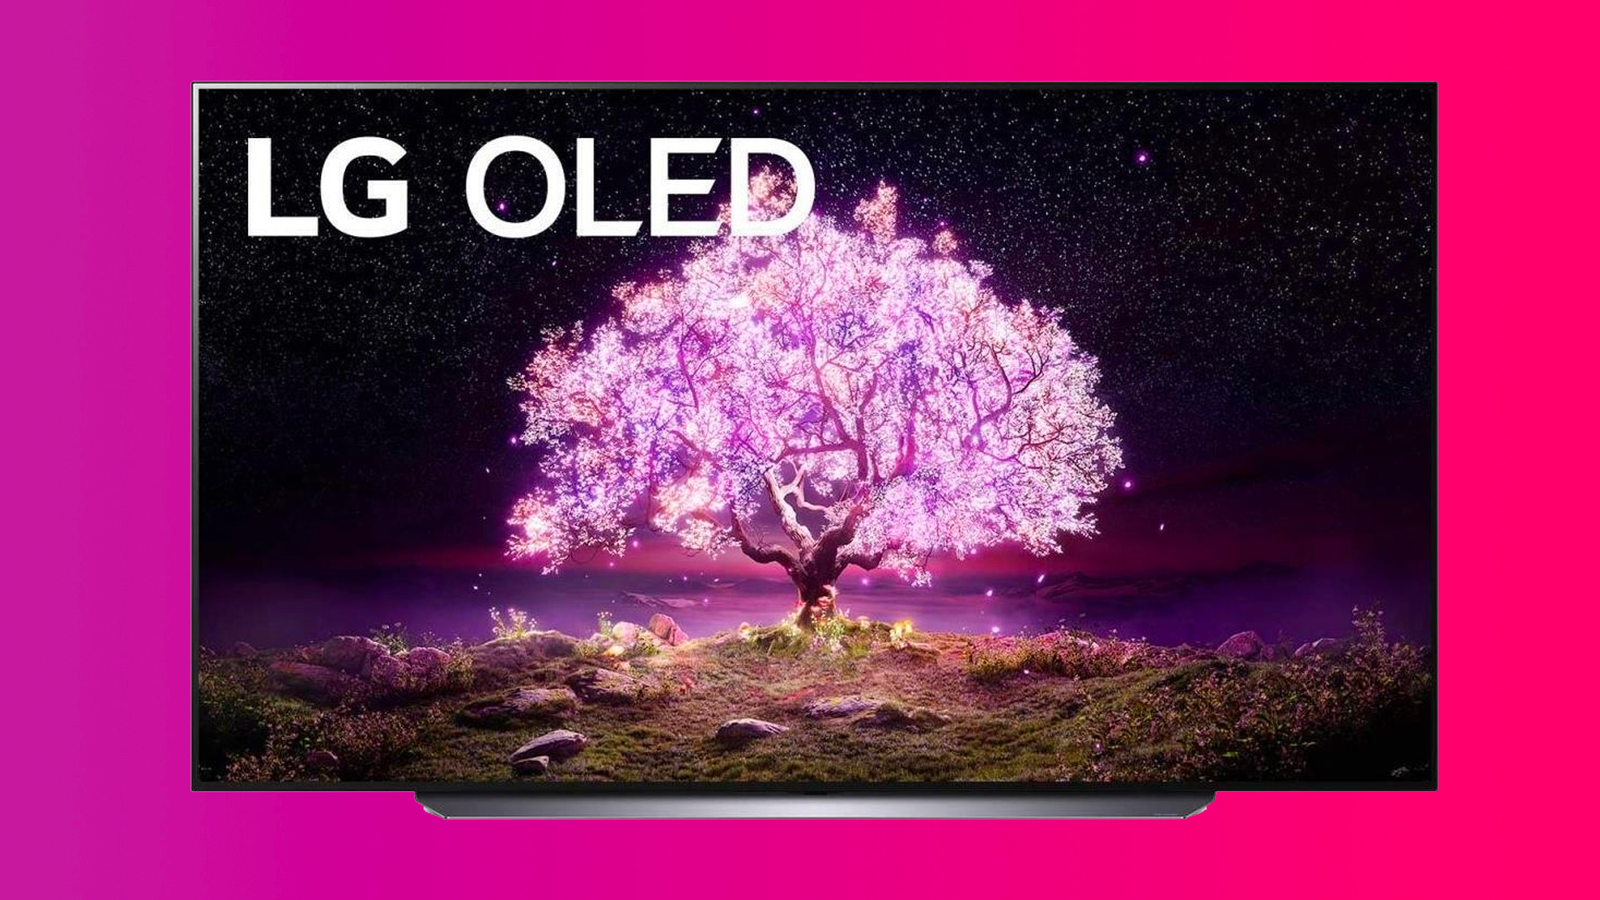 Our favourite 4K TV for gaming, the LG C1 OLED, is £759 for a 55-inch model  today